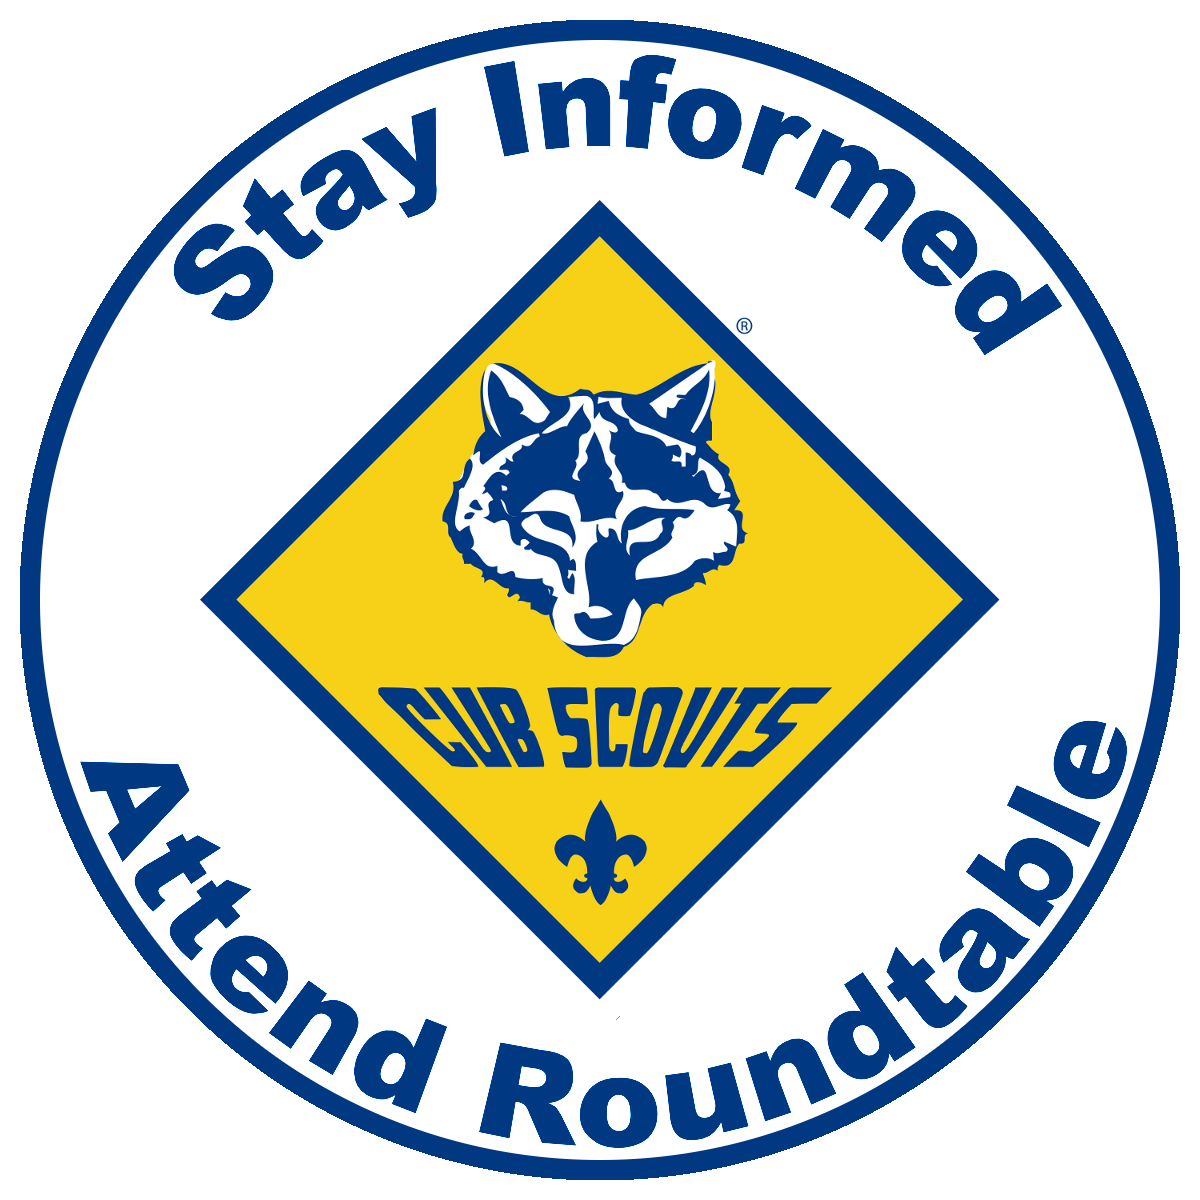 stayinformedattendcubscoutroundtable1200